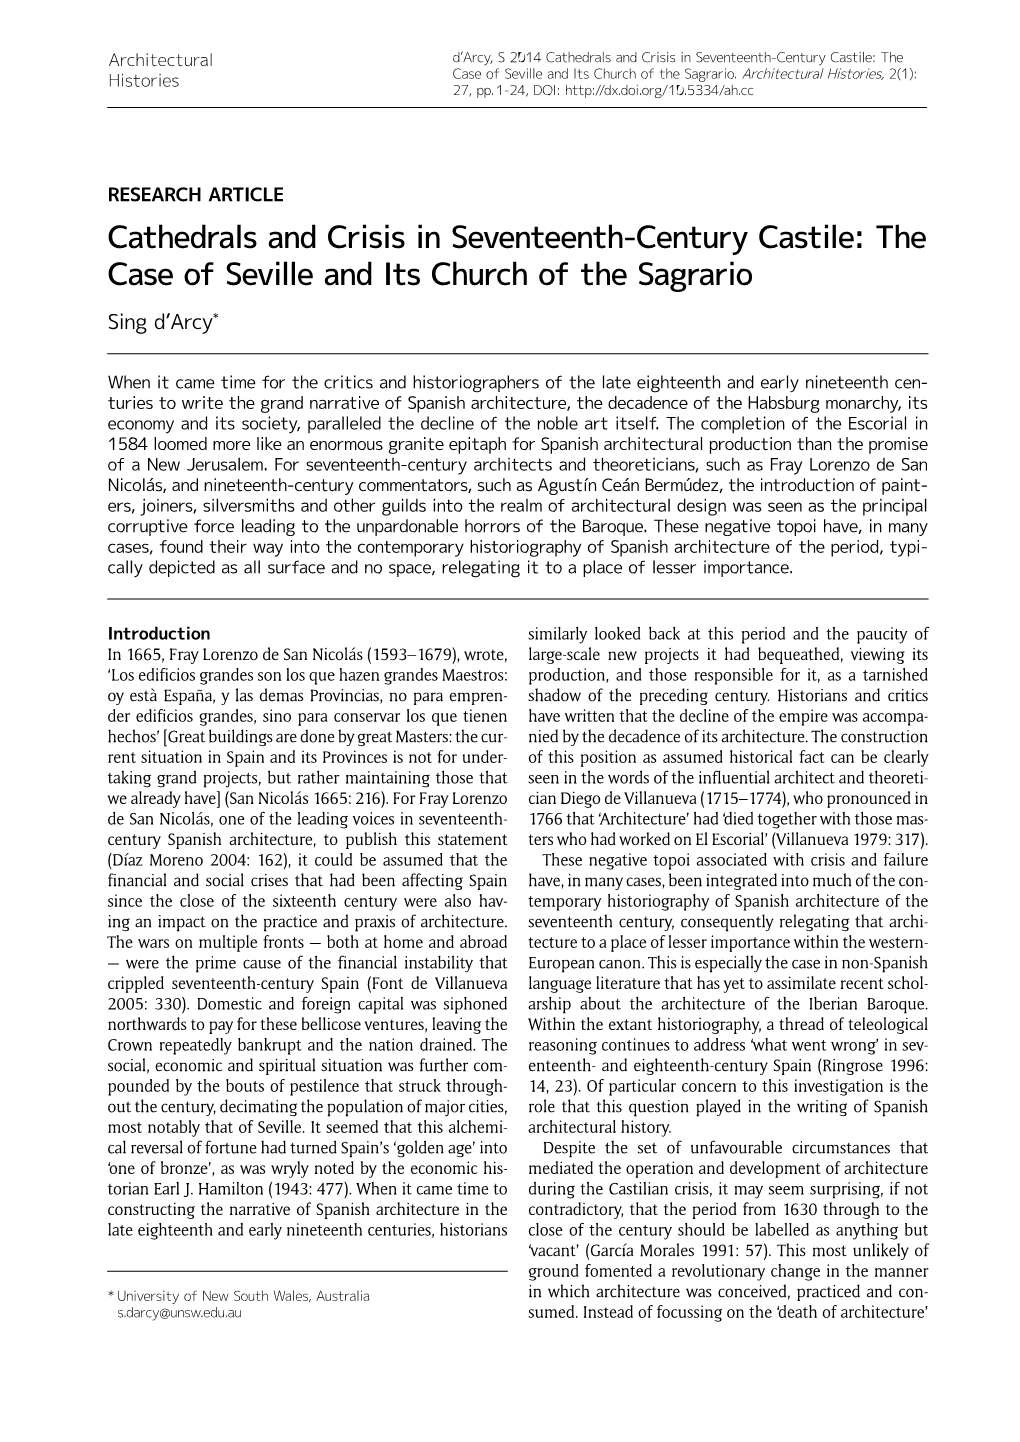 Cathedrals and Crisis in Seventeenth-Century Castile: the Case of Seville and Its Church of the Sagrario Sing D’Arcy*